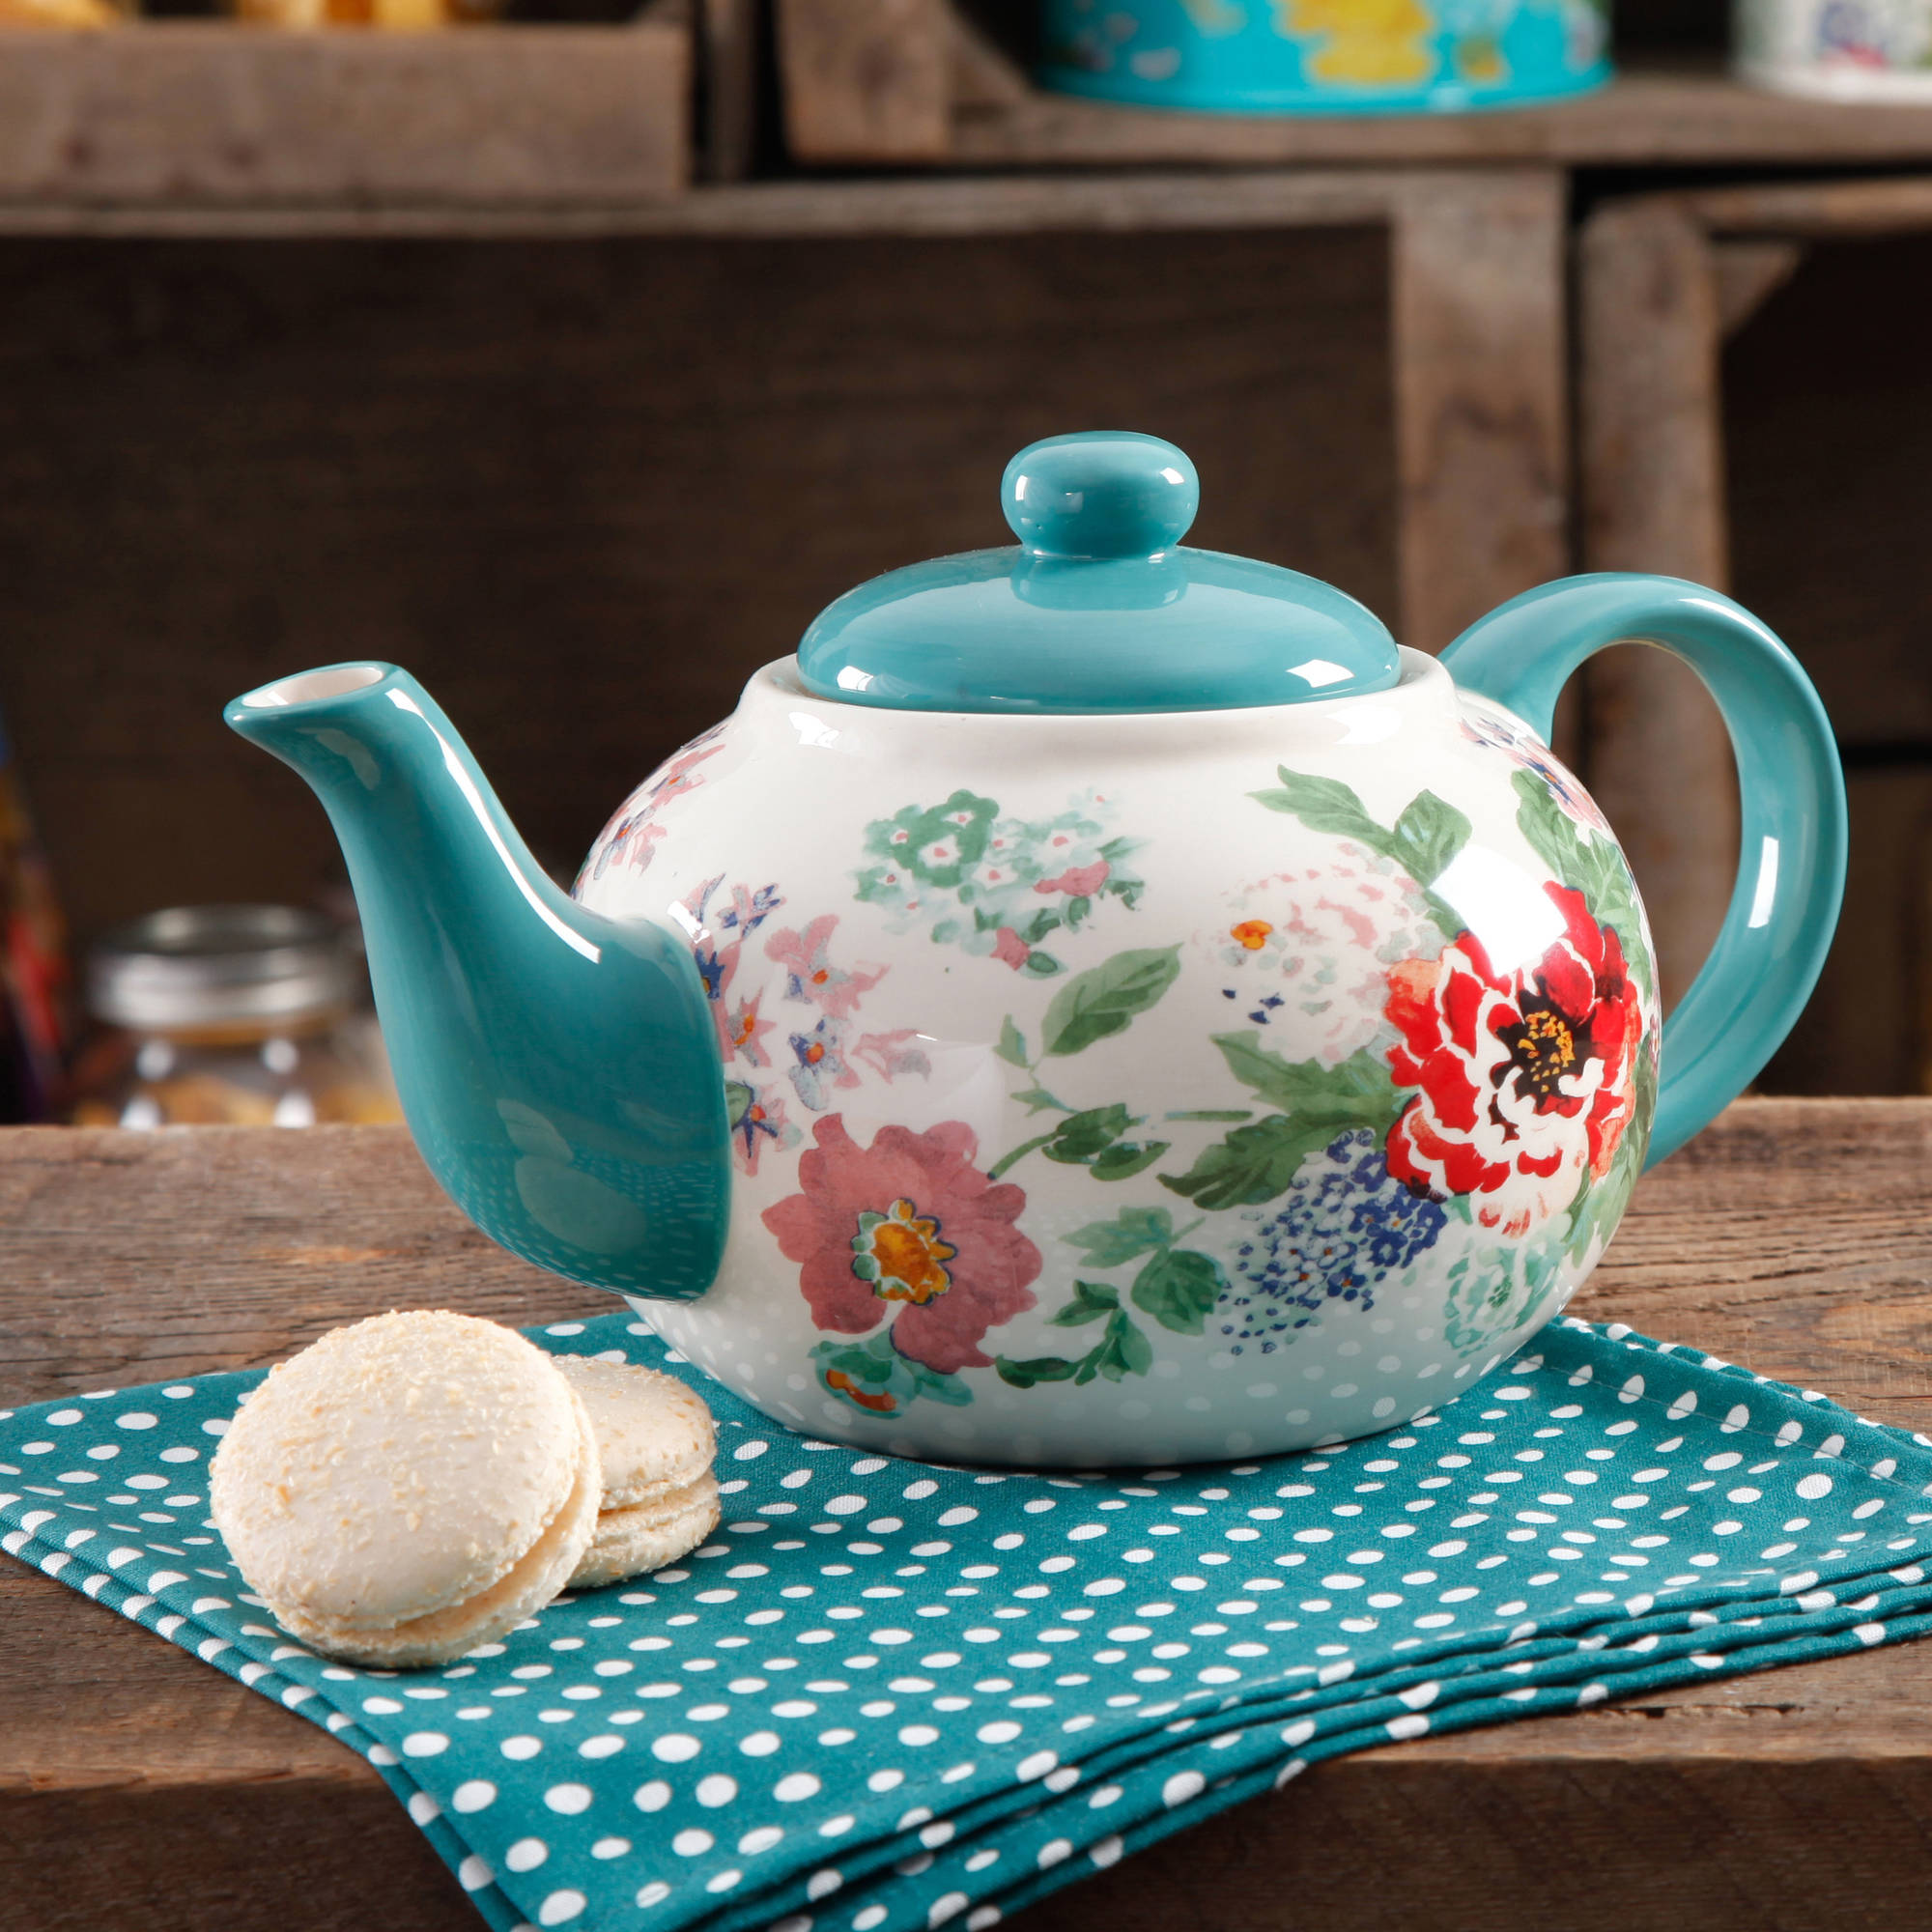 The Pioneer Woman Country Garden Teapot - image 1 of 10